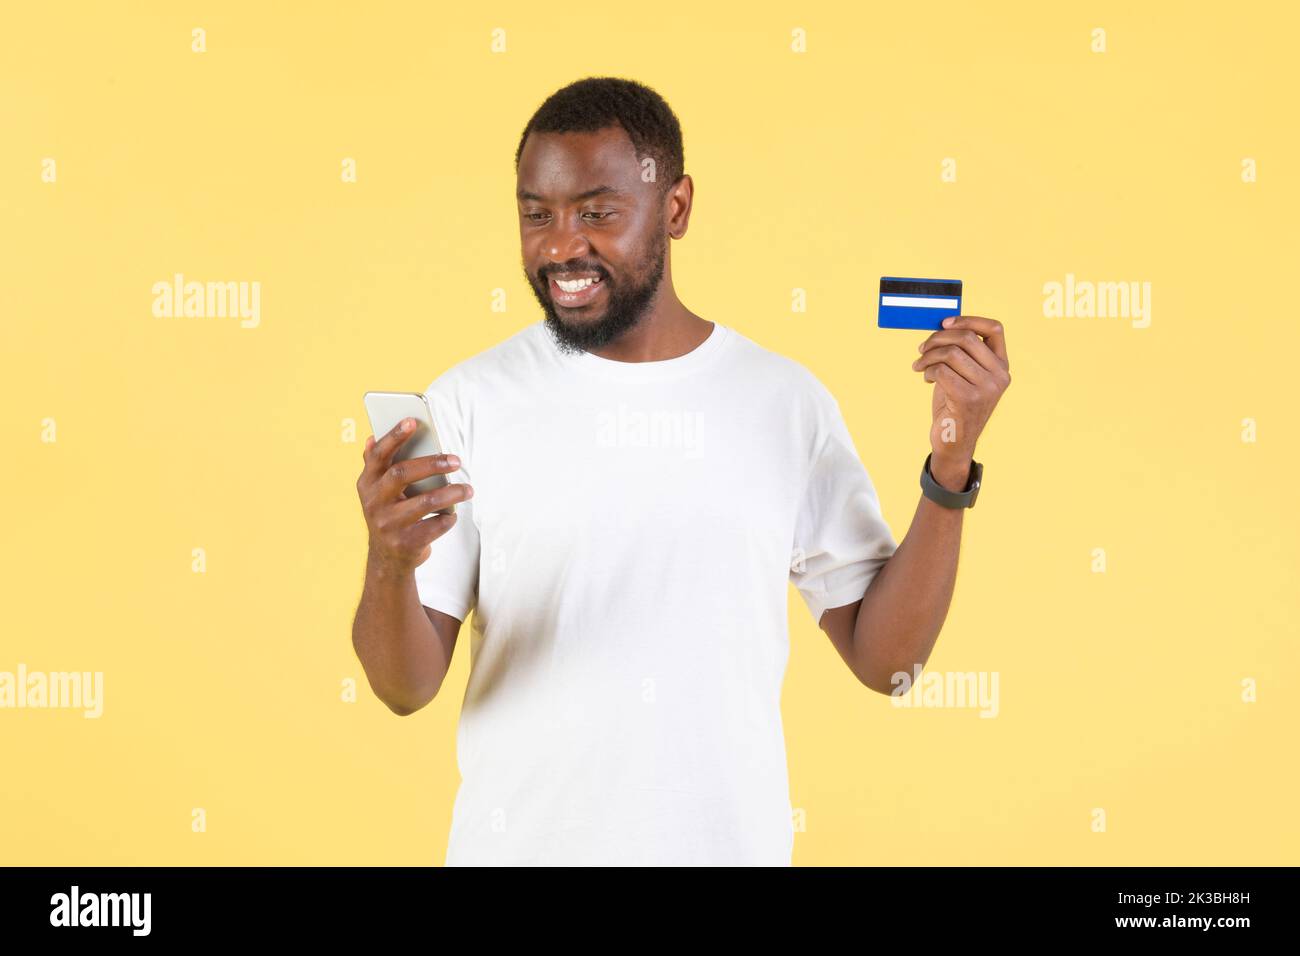 Black Guy Using Smartphone And Credit Card Shopping, Yellow Background Stock Photo